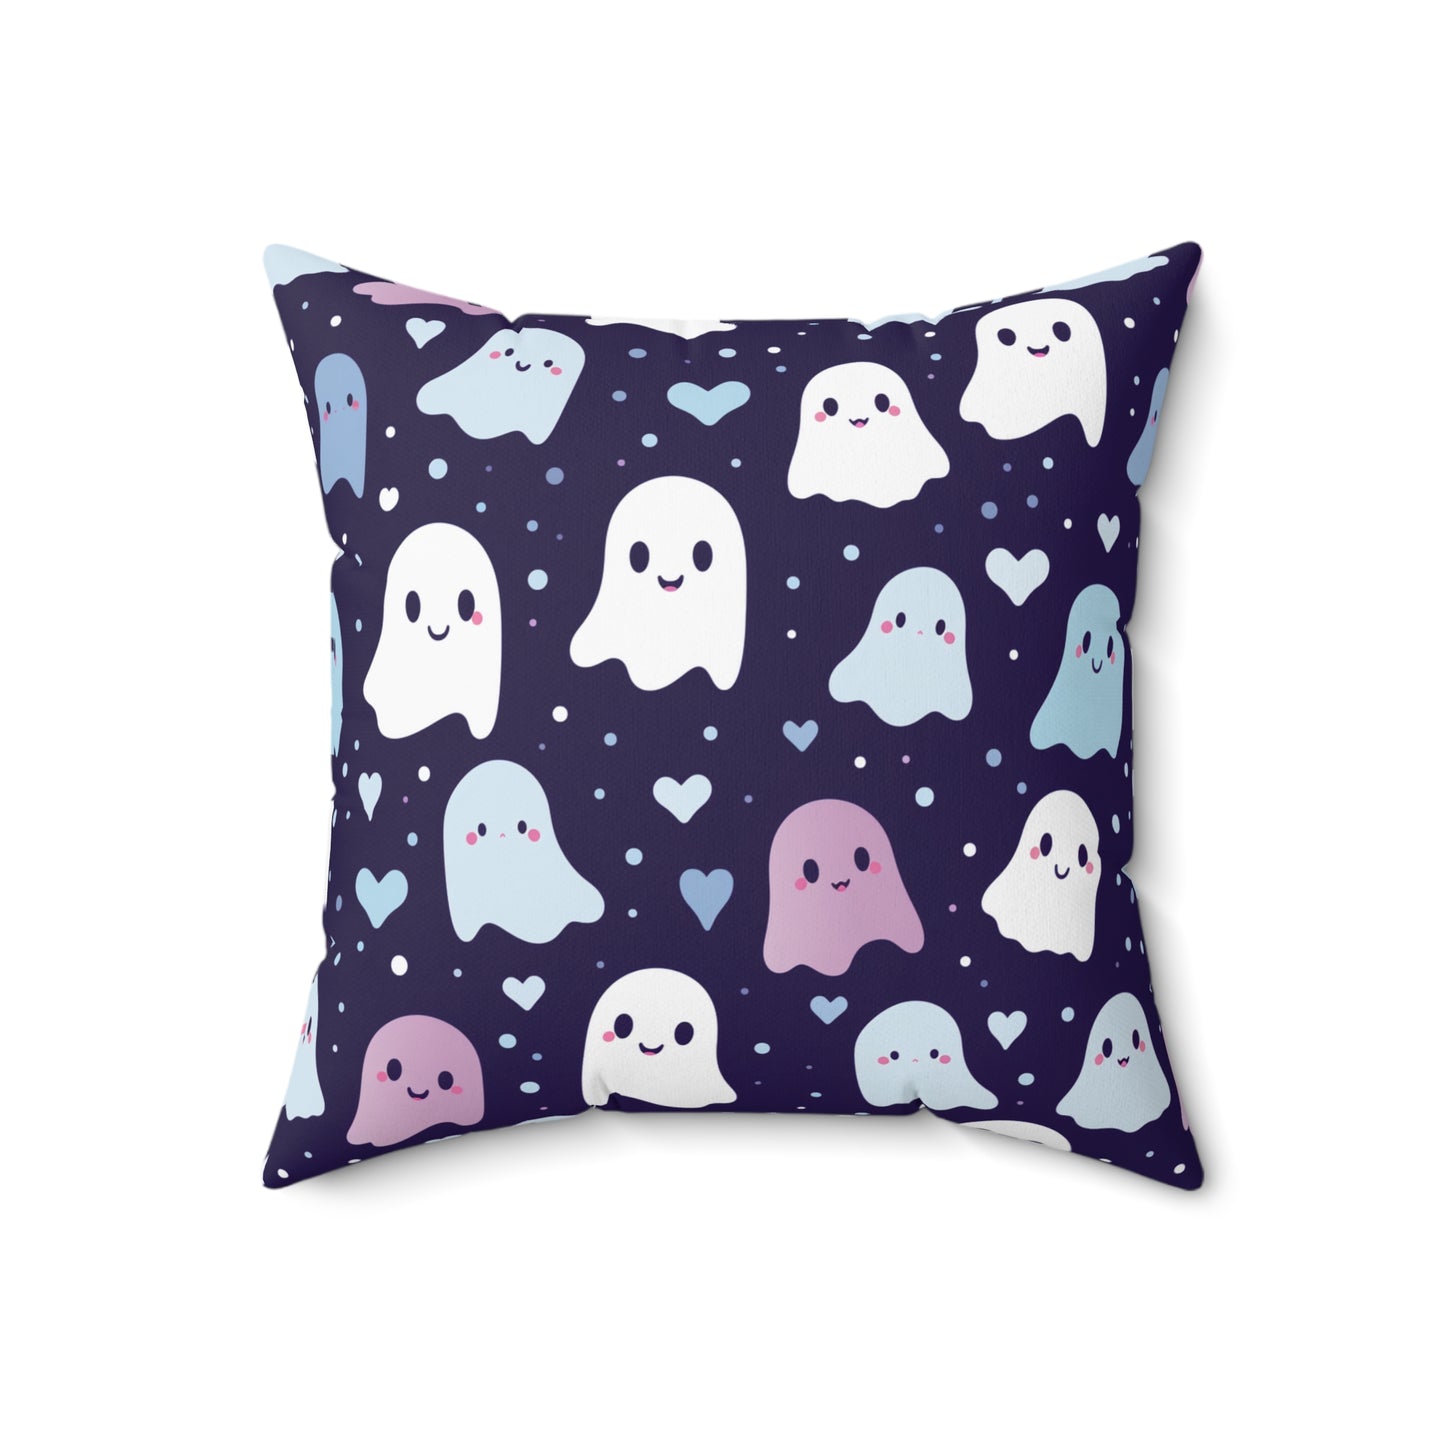 Cute Ghosts Accent Throw Pillow